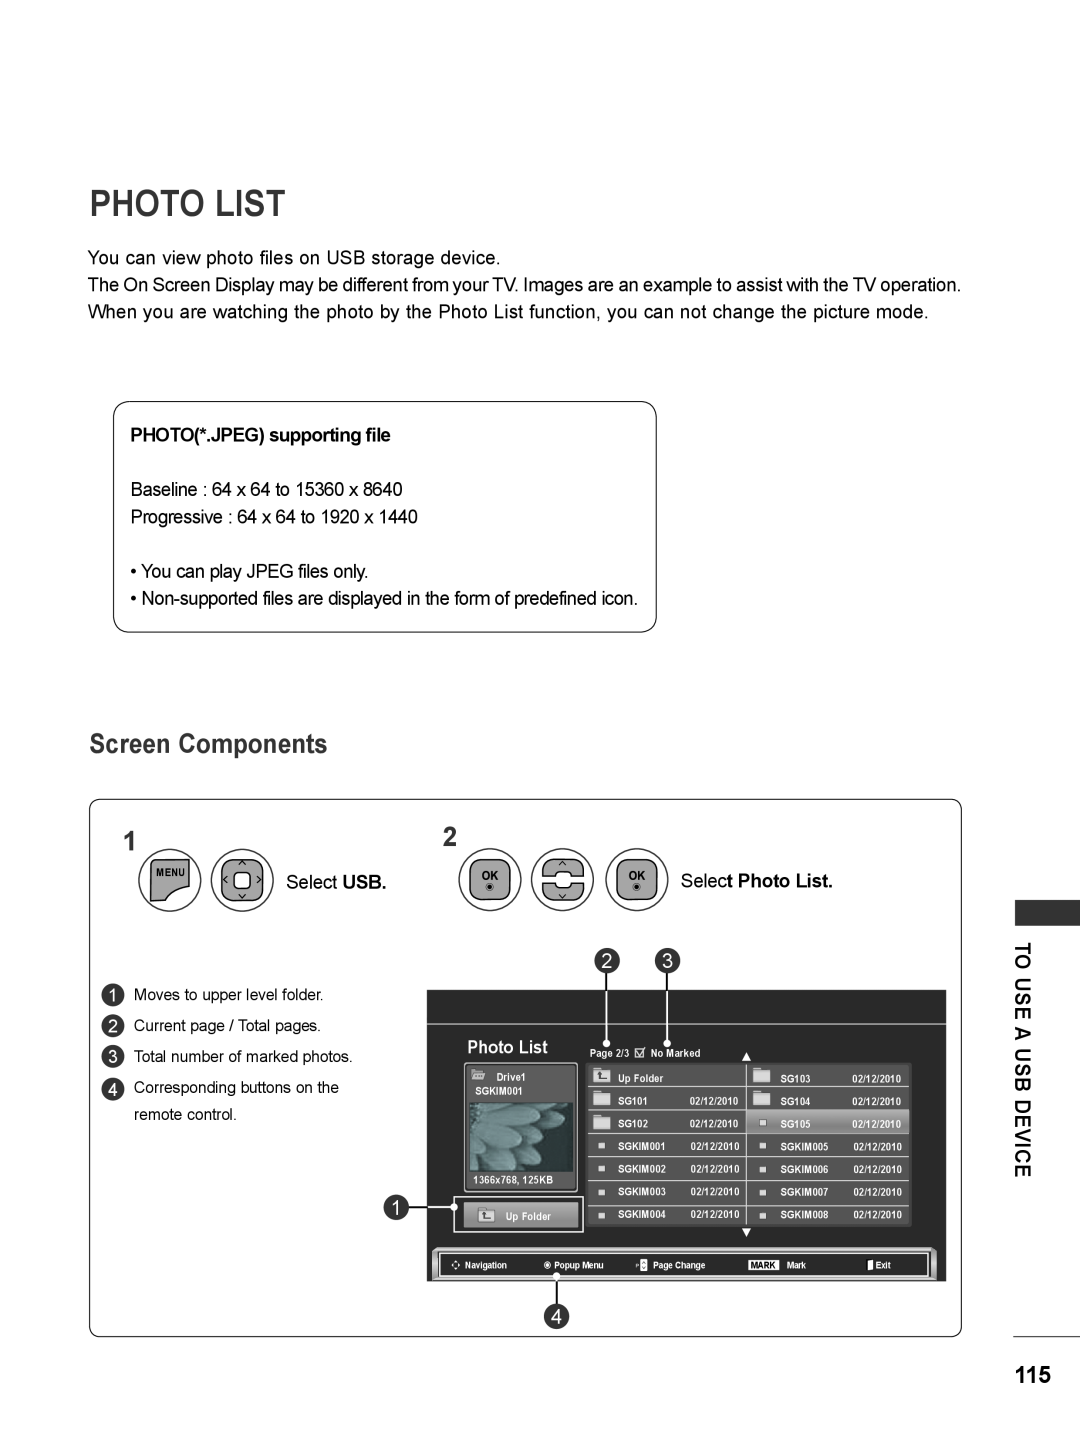 LG Electronics M2080DF, M2780DF Photo List, Screen Components, PHOTO*.JPEG supporting file, Select USB, Use A Usb Device 